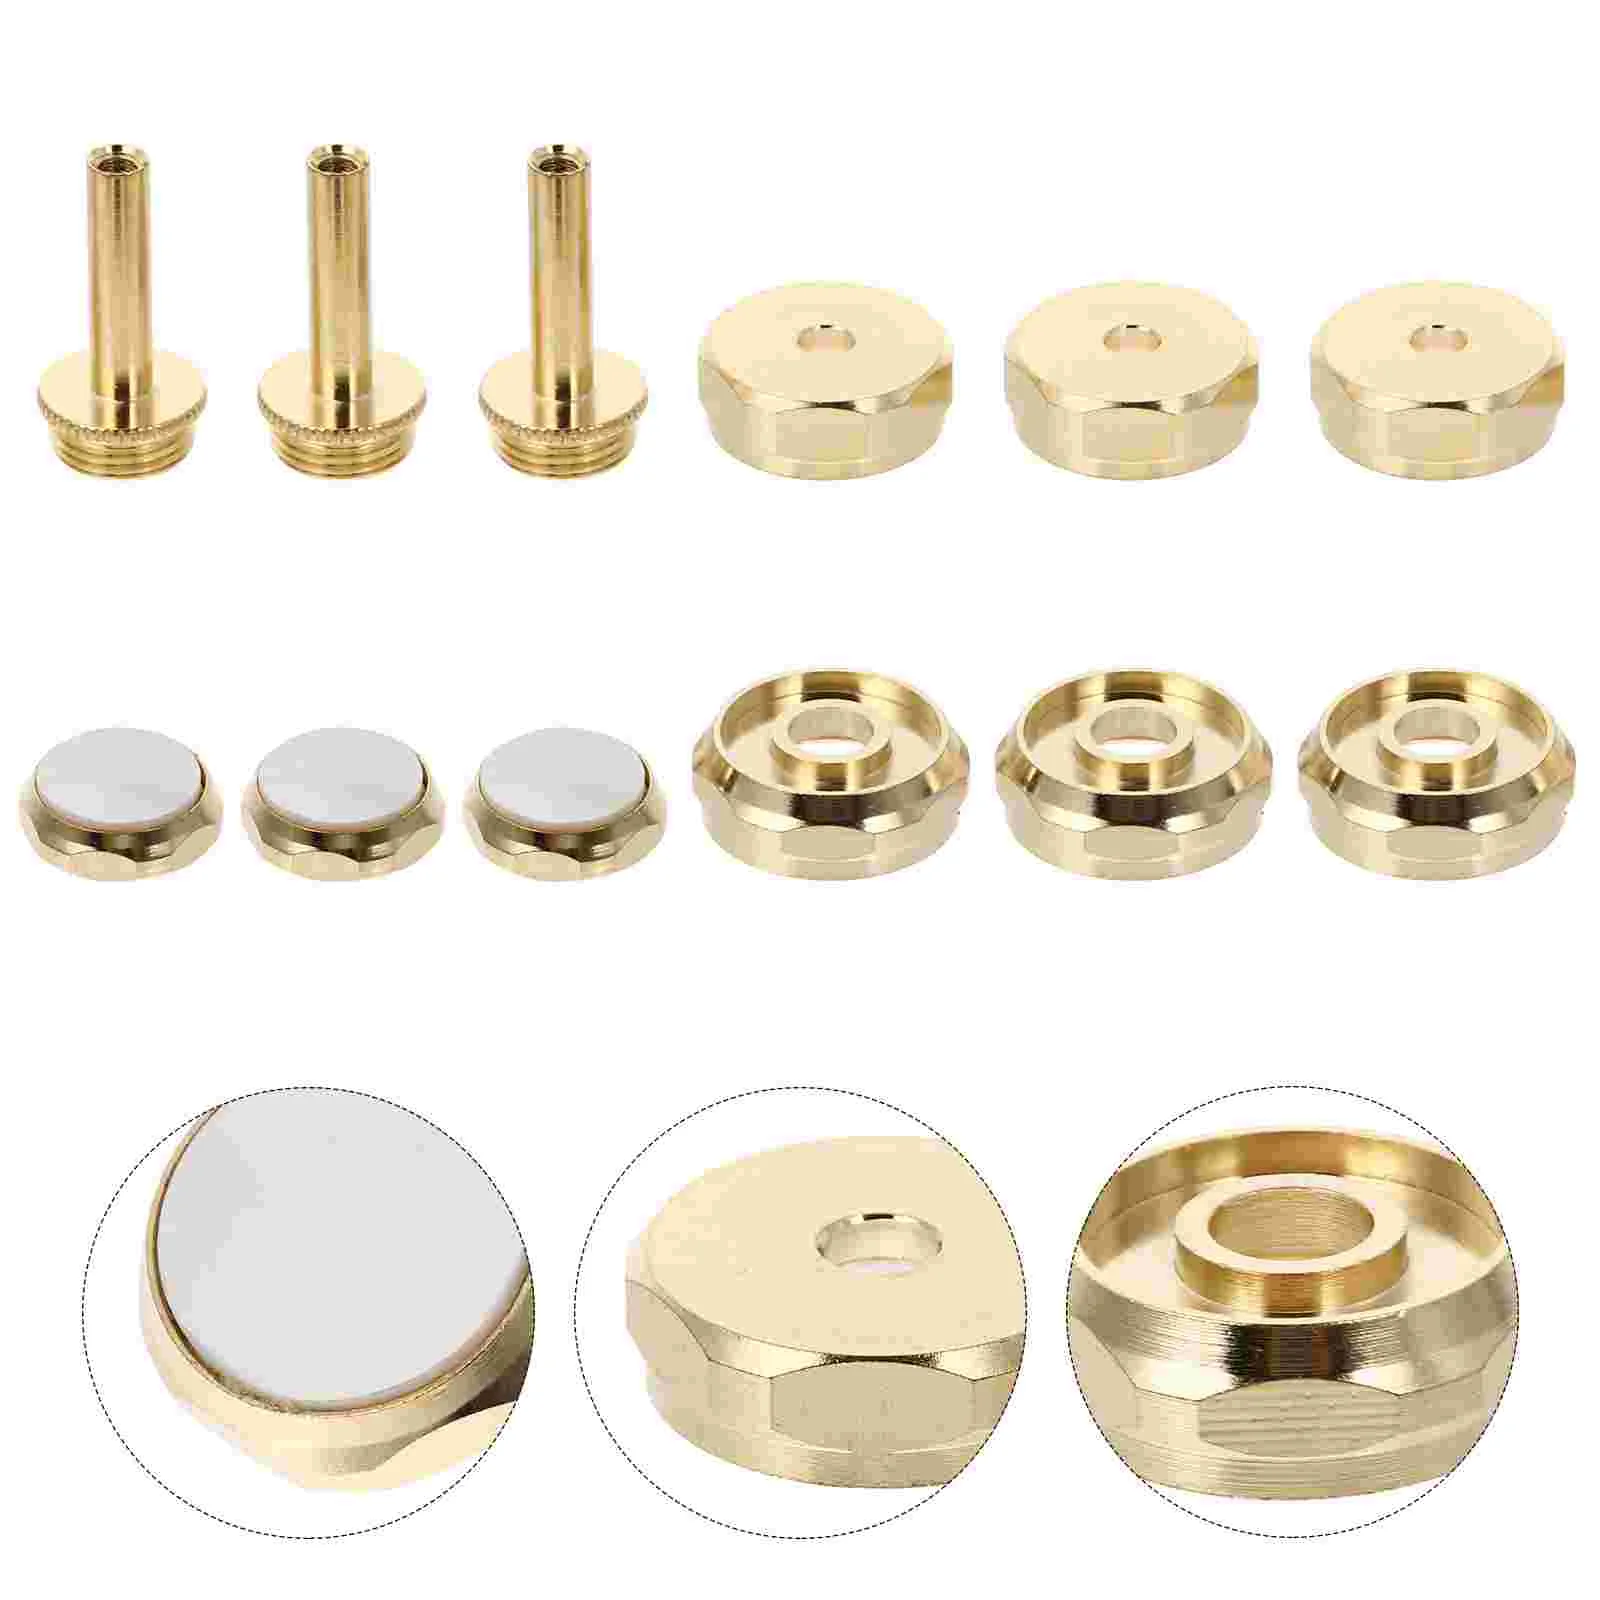 

Small Button Trumpet Buckle Instrument Tool Pocket Piston Musical Accessory Copper Instrumentos Musicales Para Adultos